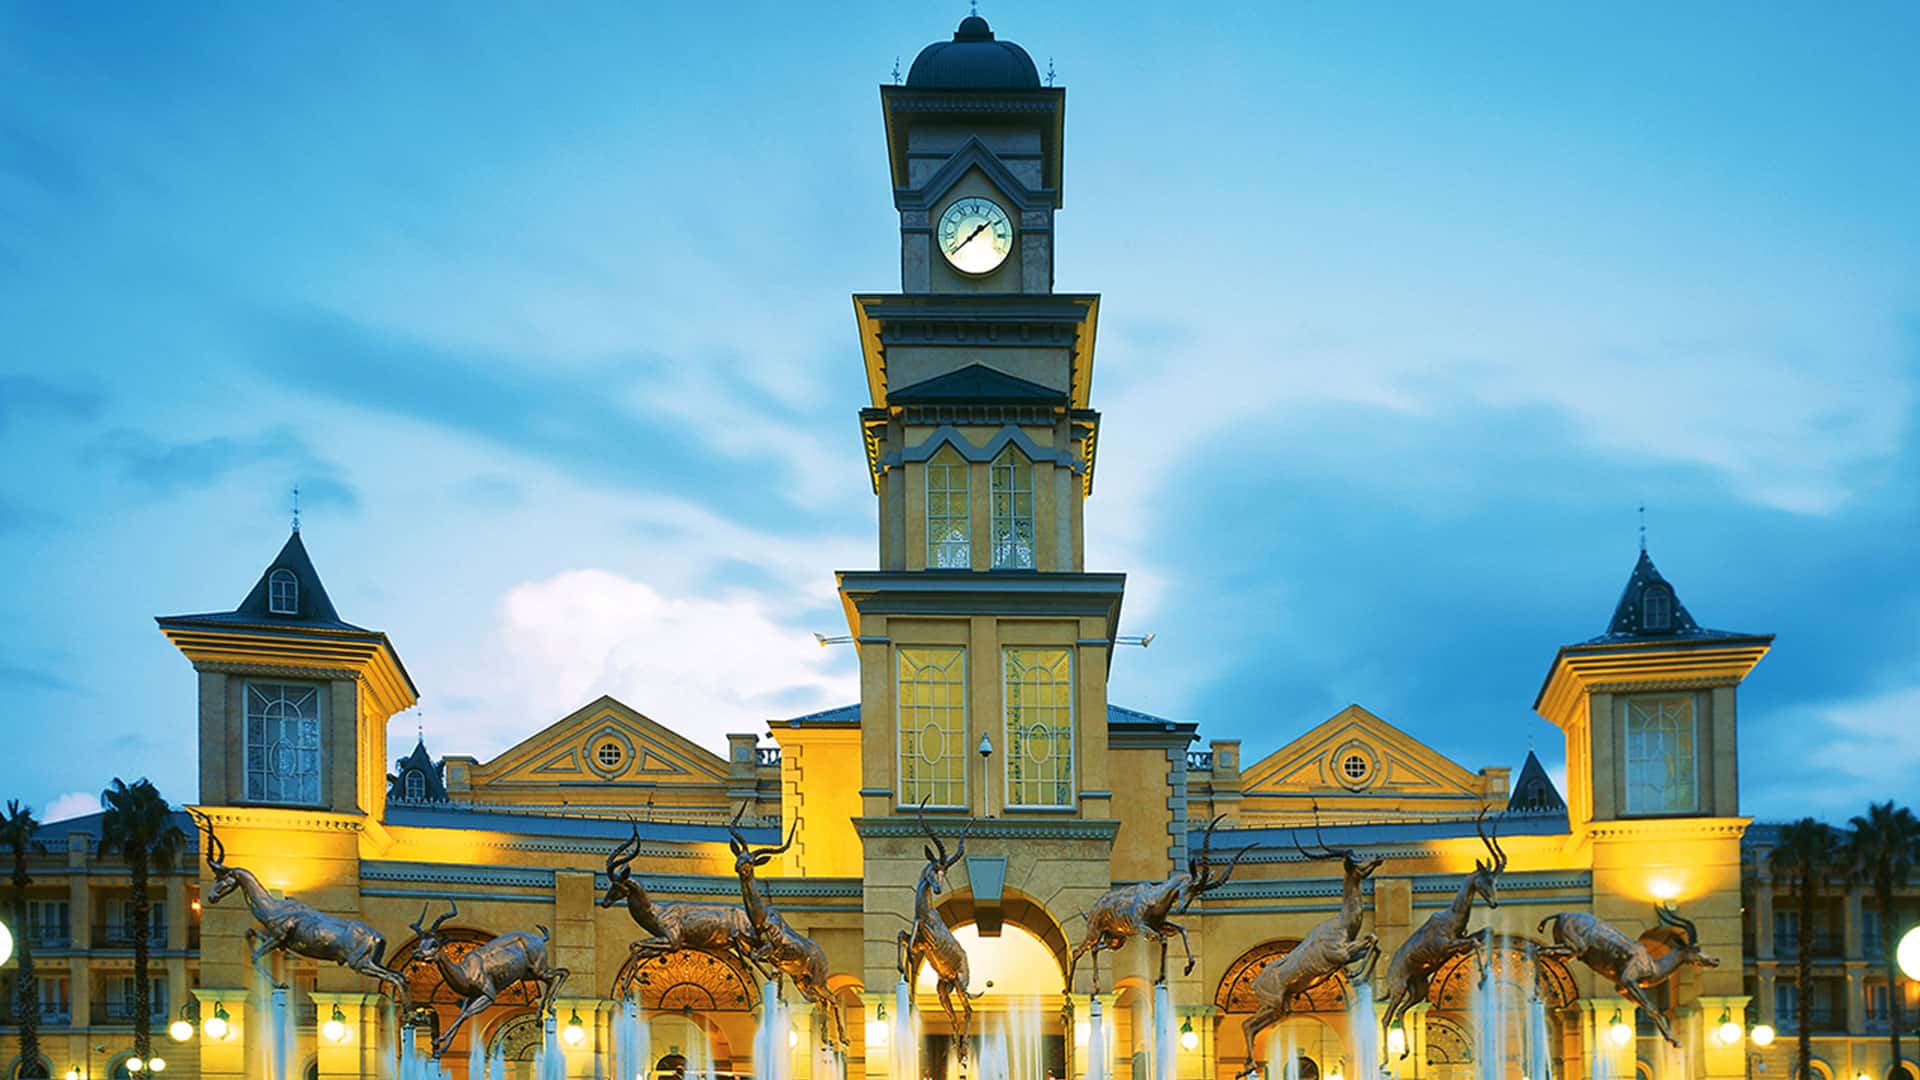 Exterior View Of Gold Reef City Casino Showing Clock Tower